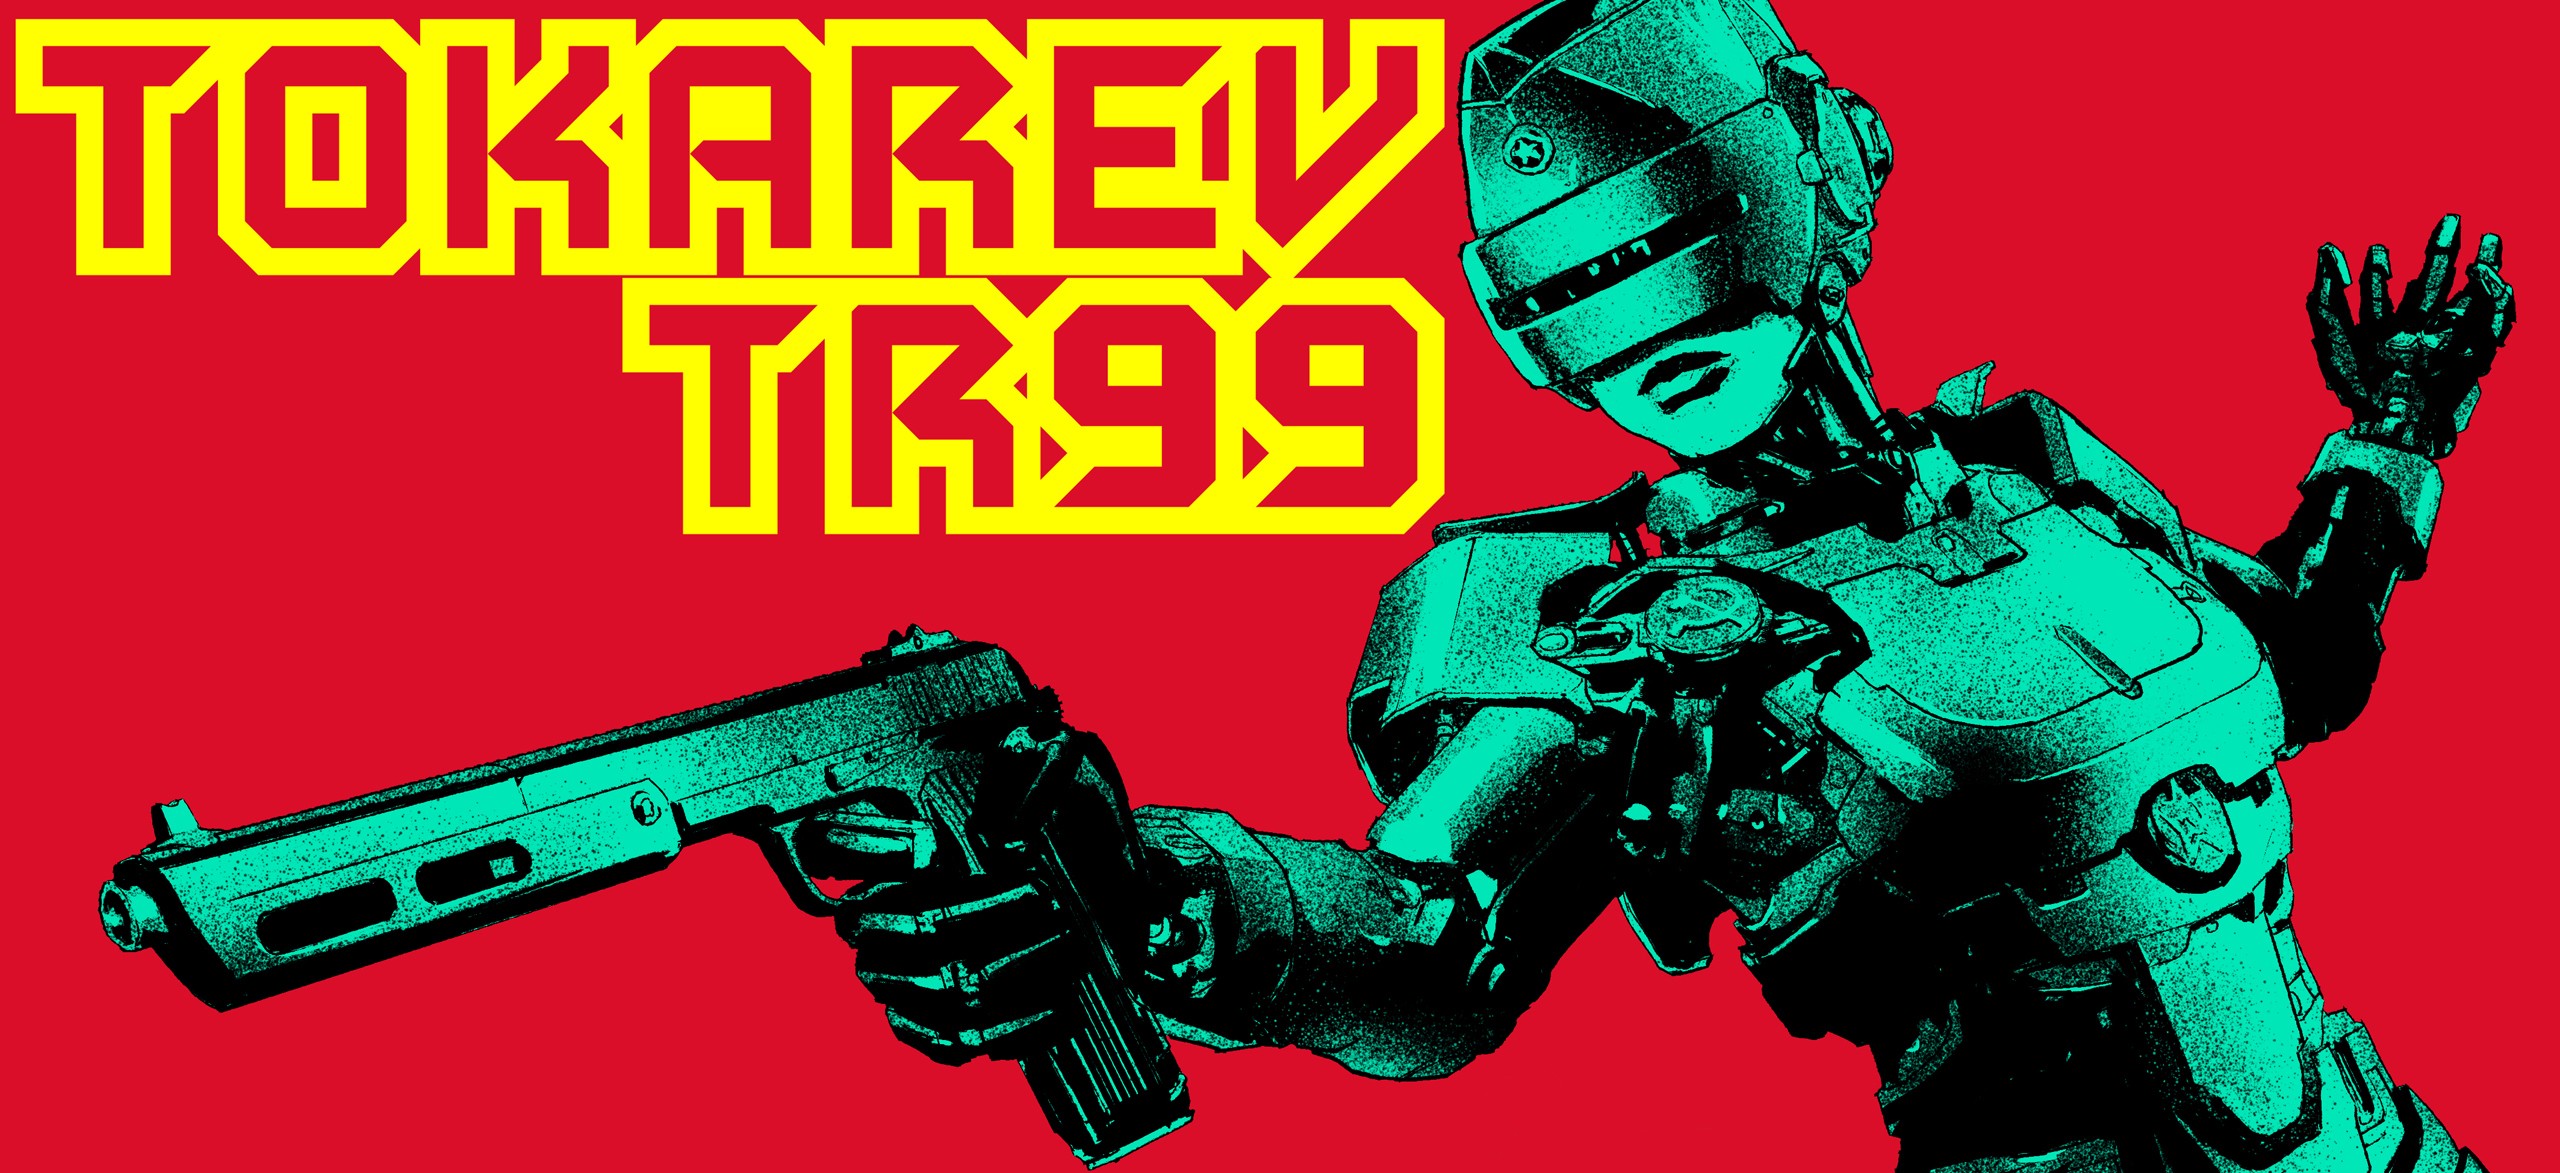 General 2560x1173 RoboCop cyborg women Russian vintage typography red background machine science fiction